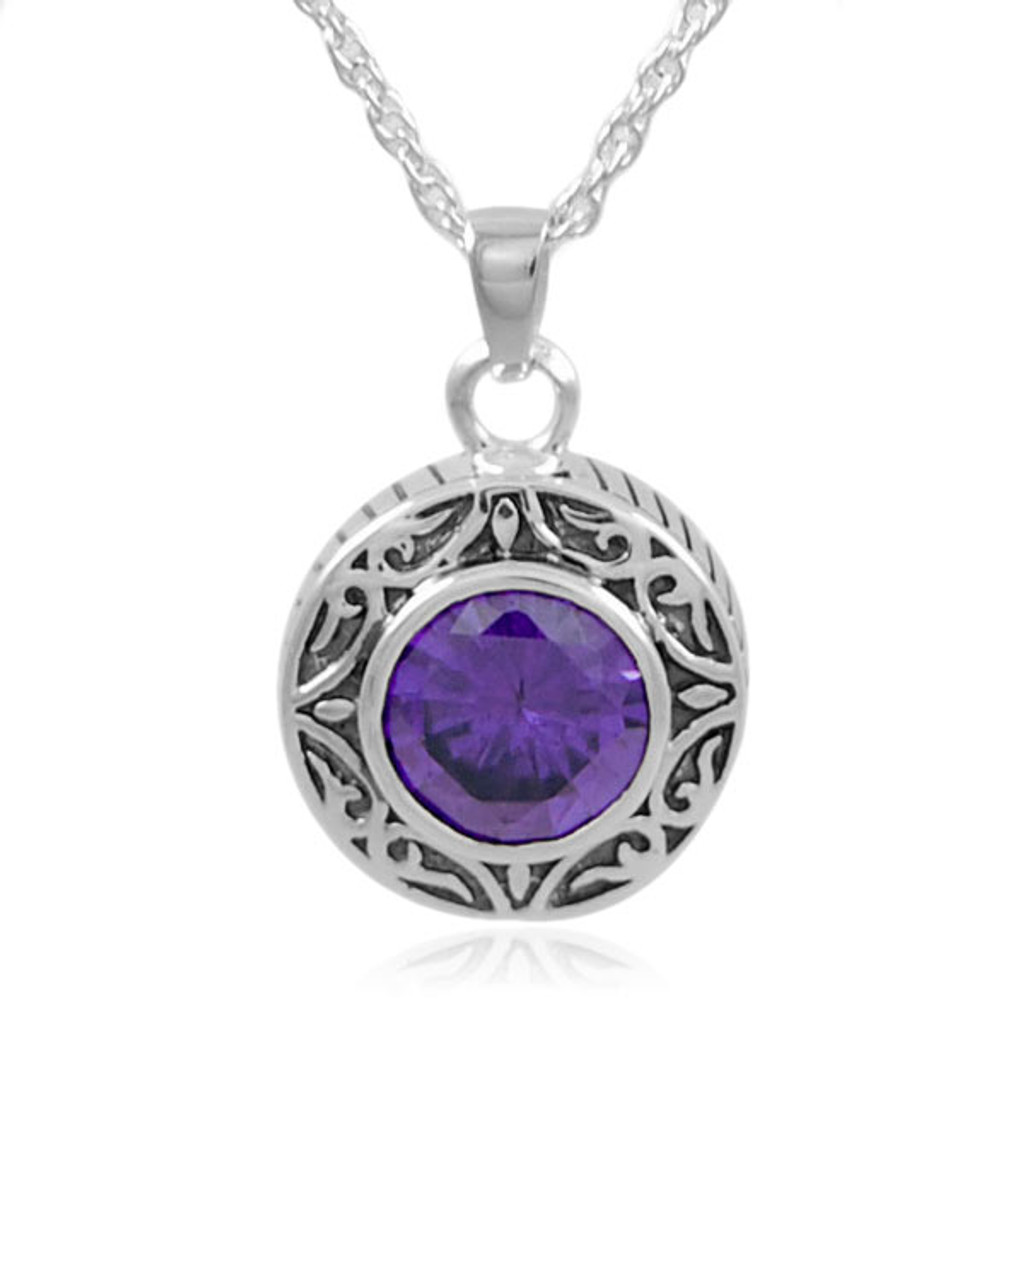 Amethyst Round Sterling Silver Cremation Jewelry Pendant Necklace